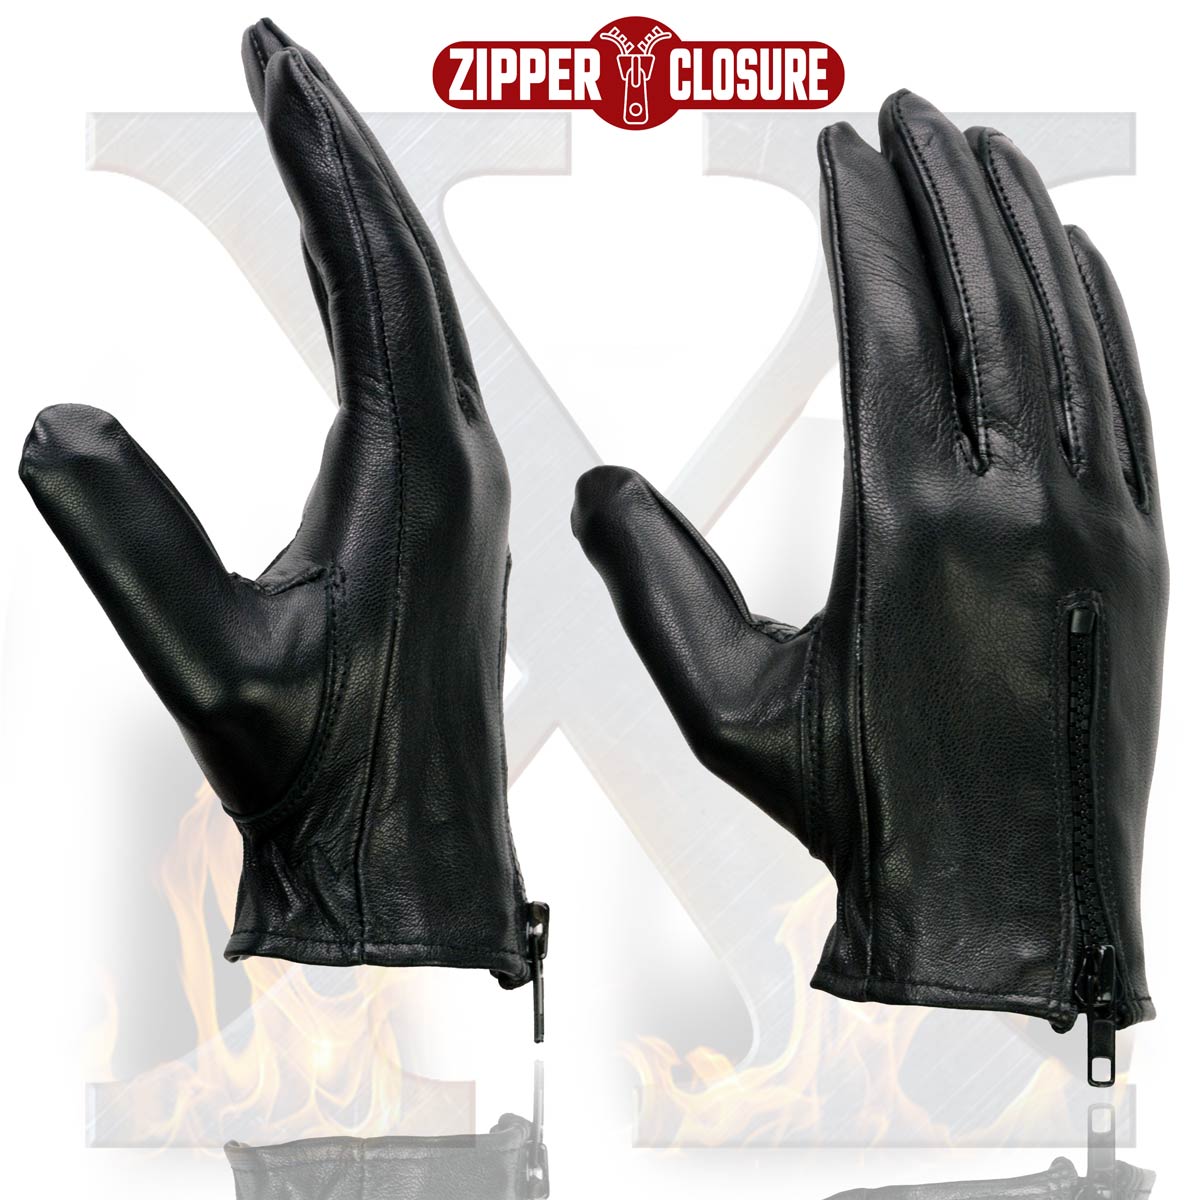 Xelement XG37536 Ladies Black Unlined Leather Gloves with Zipper Closure